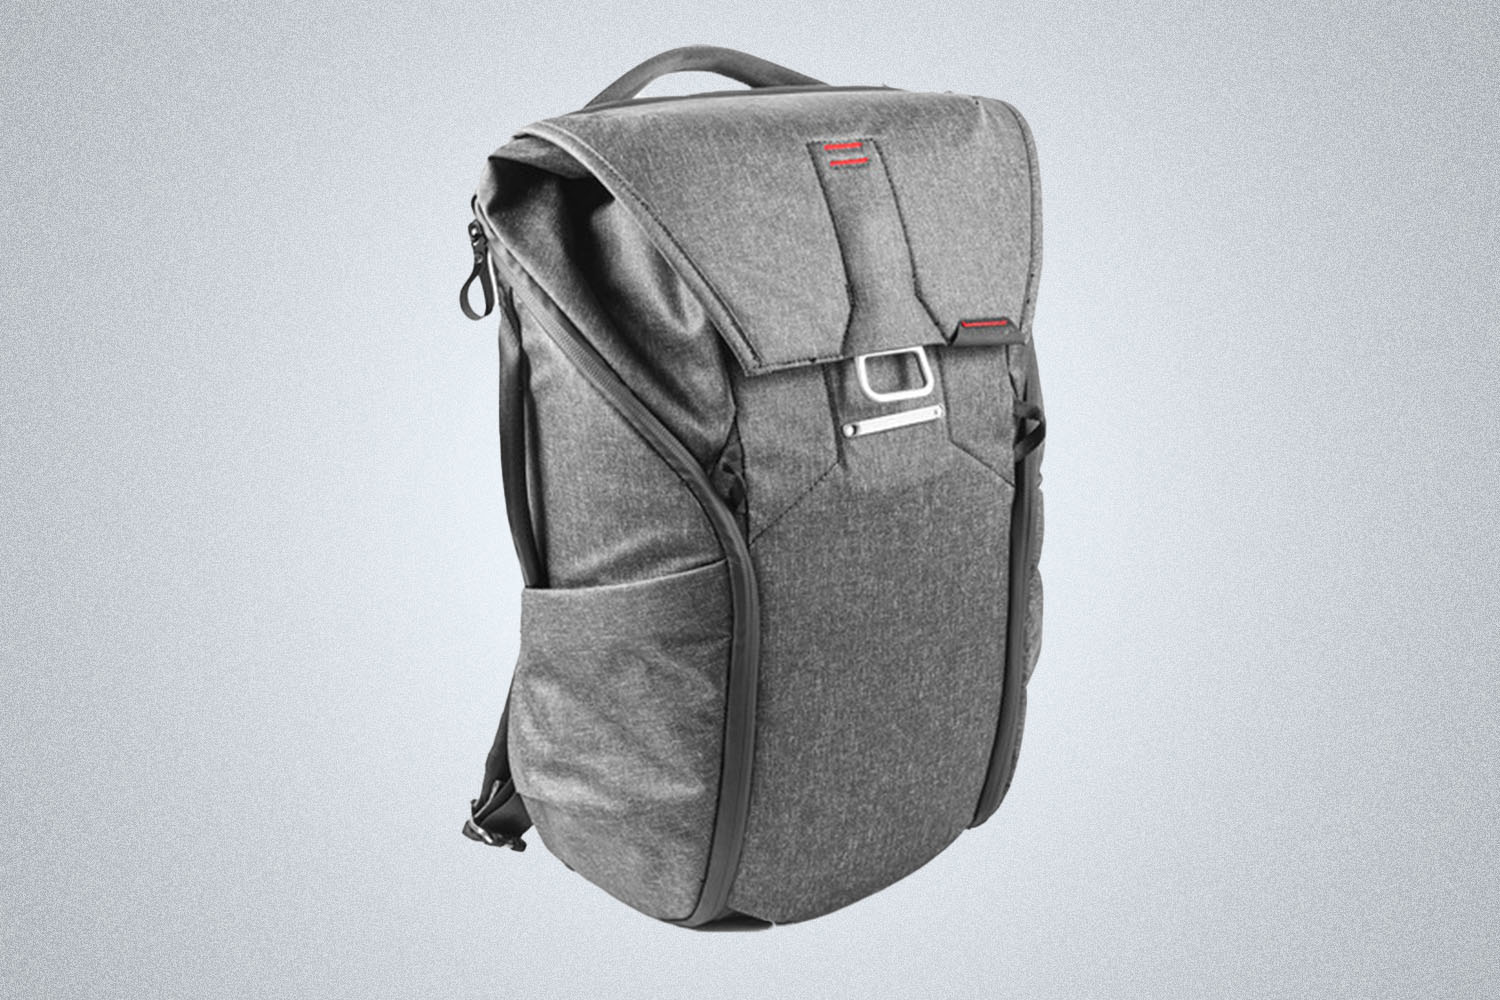 A Peak Designs Everyday Backpack on a gray background